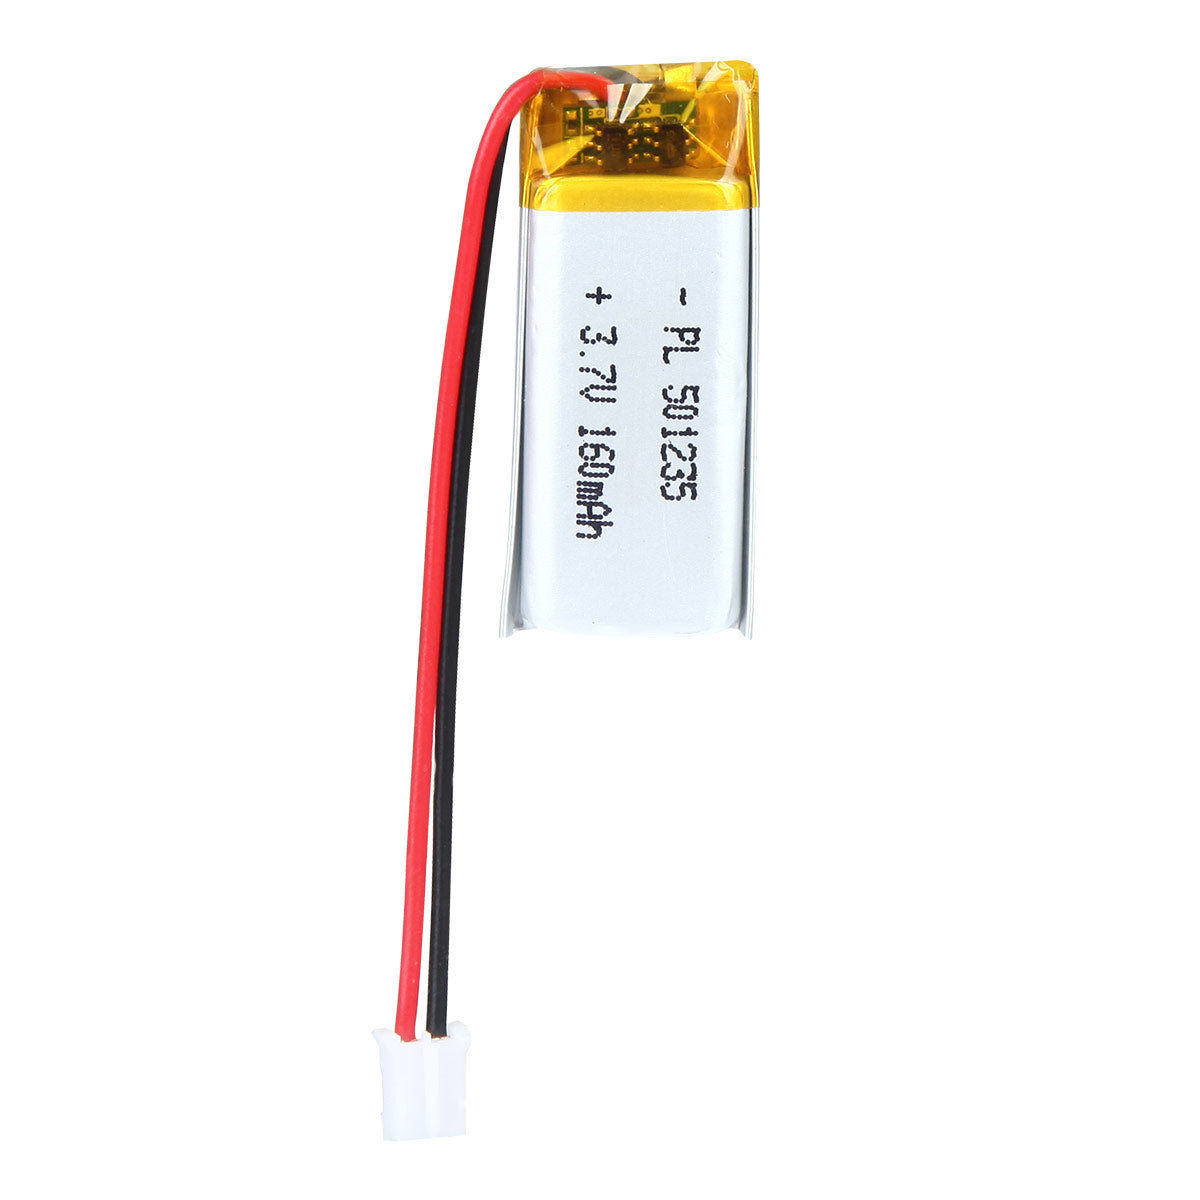 Y3.7V 160mAh 501235 Rechargeable Lithium Polymer Battery